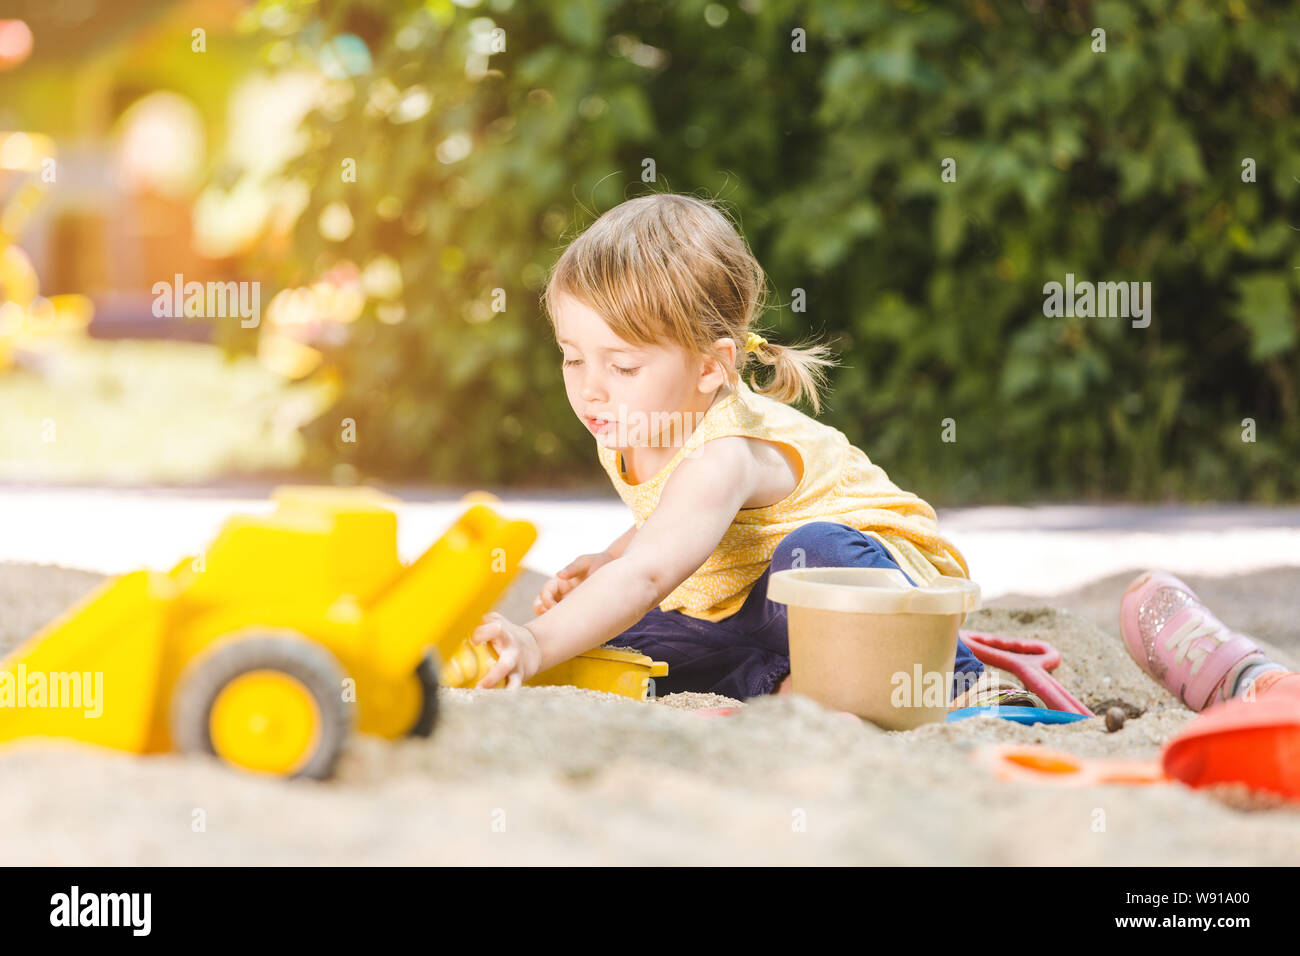 Little girl having lots of fun with her toys playing in the sandbox Stock Photo